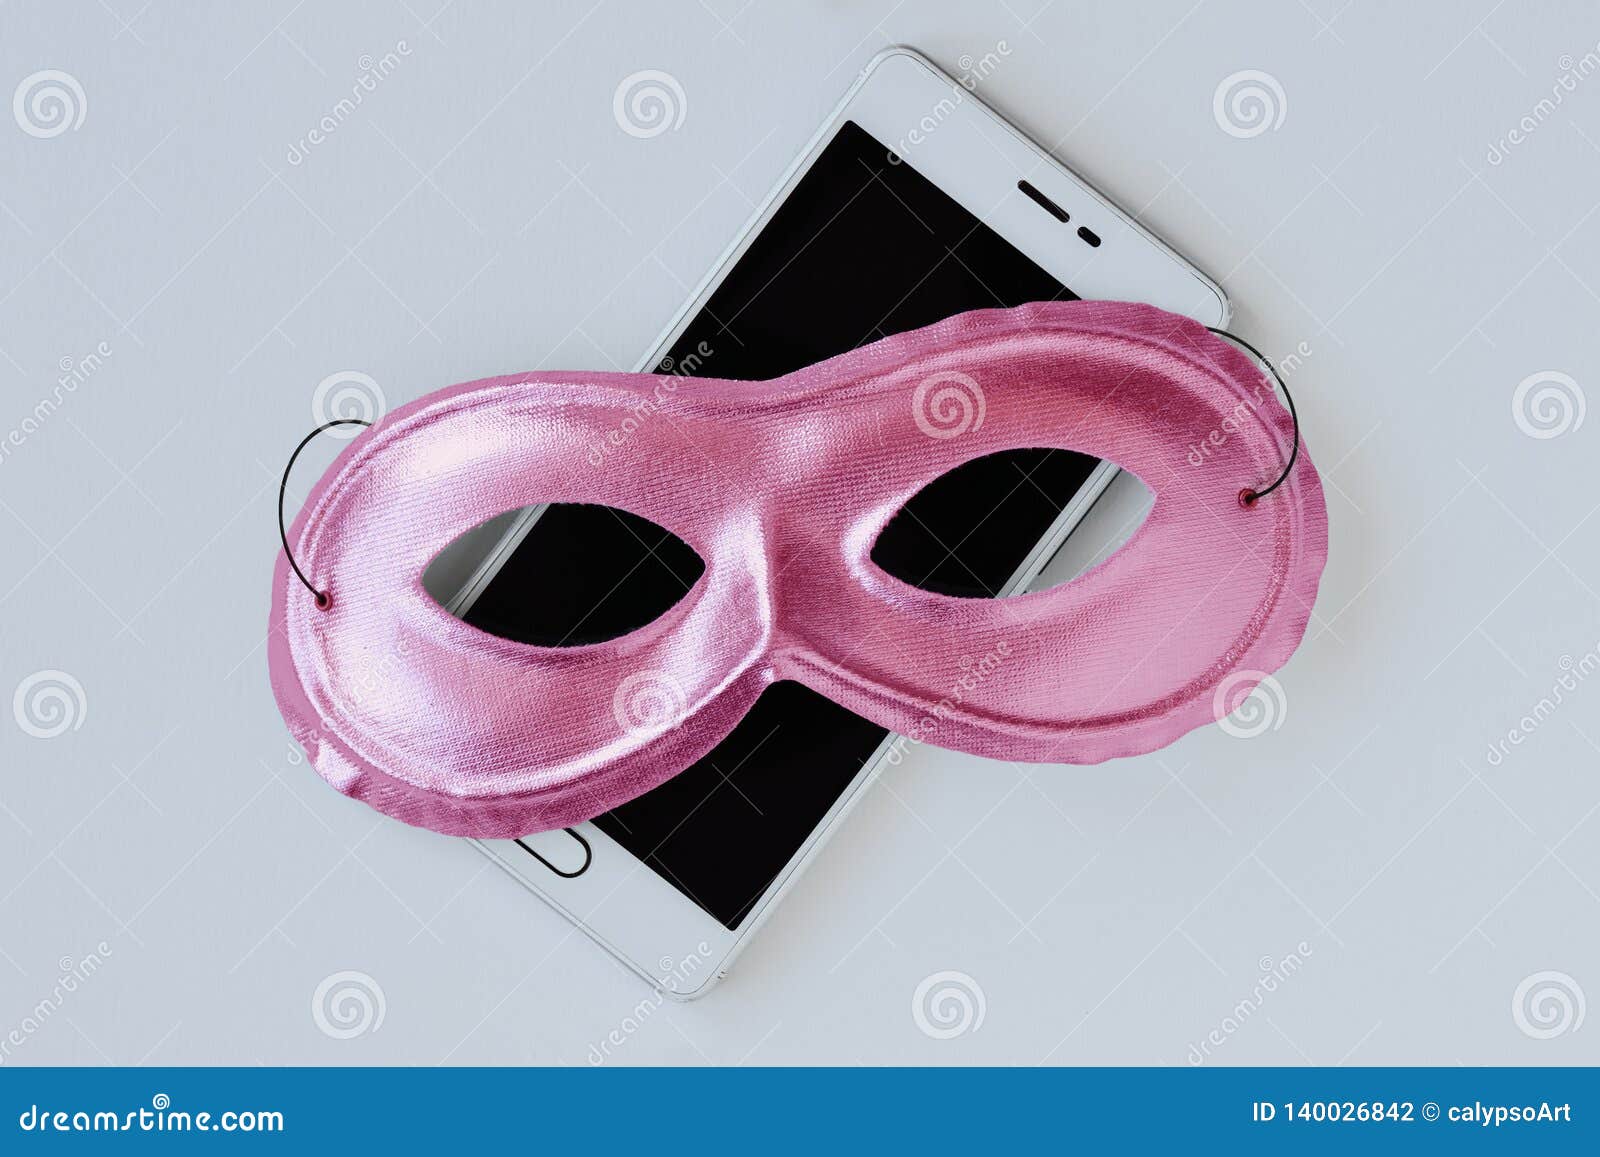 pink mask on mobile phone - concept of privacy, security and anonymity of mobile phone for women